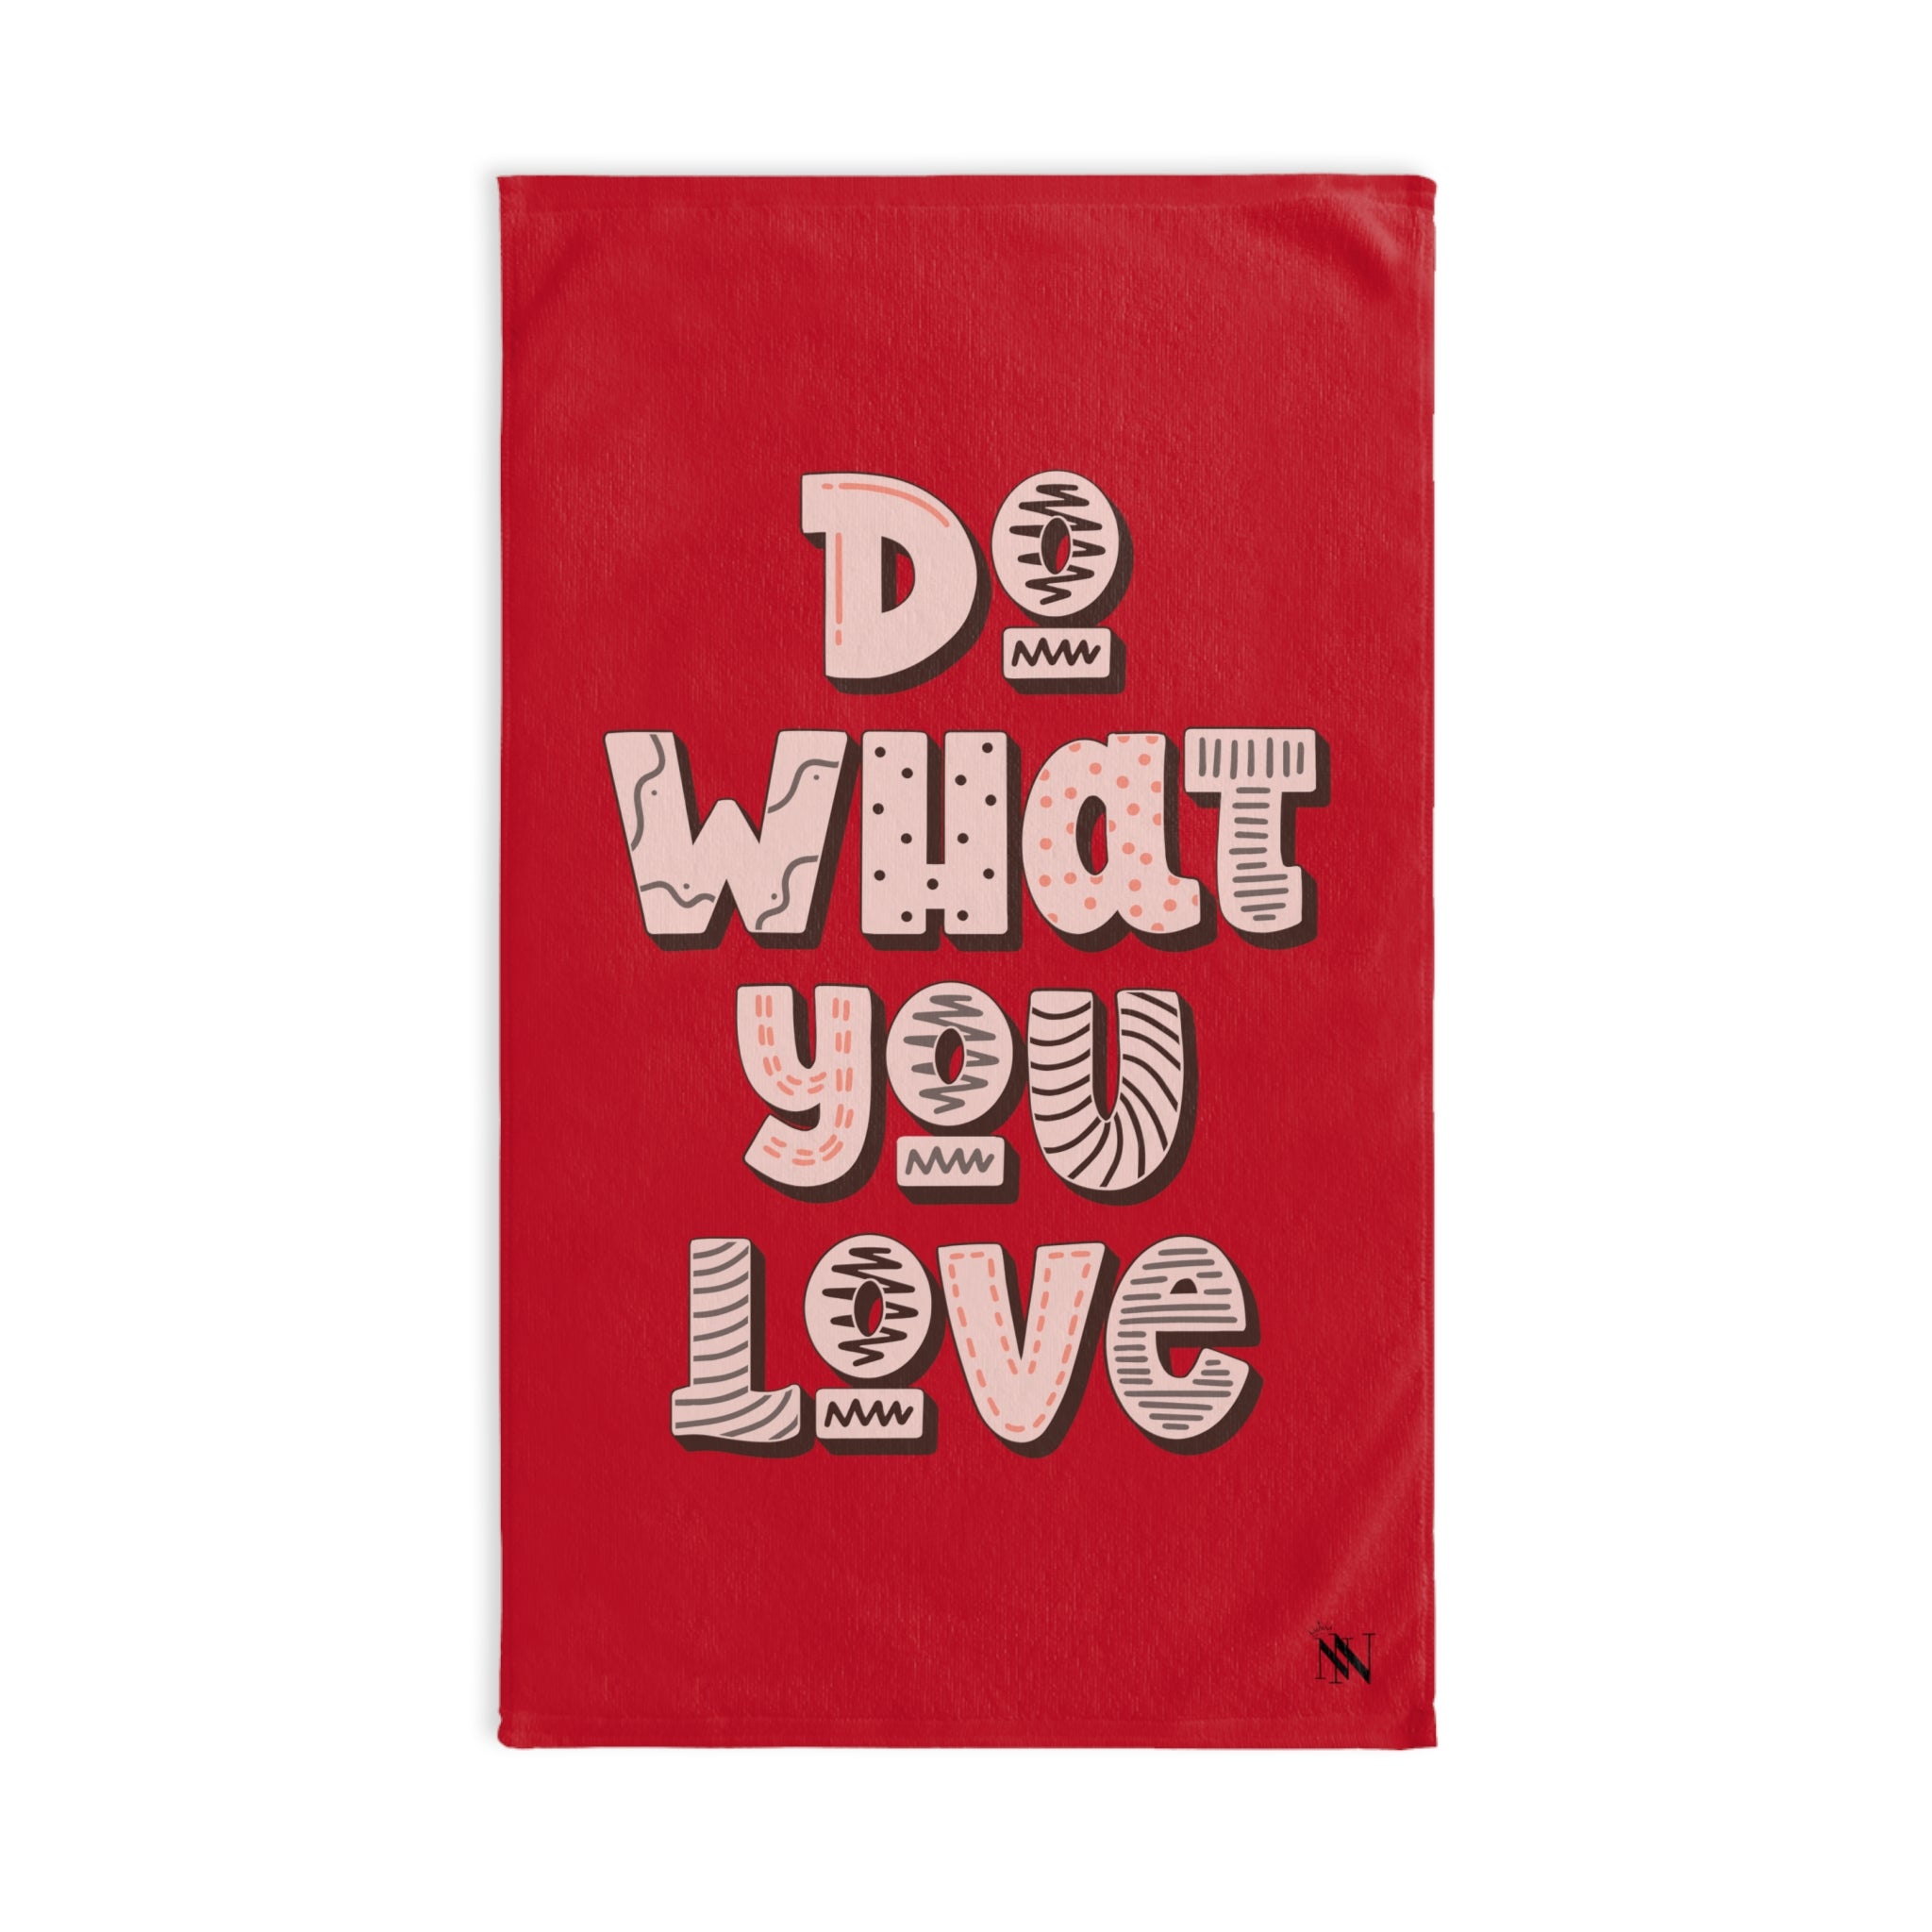 What DO Love You Red | Sexy Gifts for Boyfriend, Funny Towel Romantic Gift for Wedding Couple Fiance First Year 2nd Anniversary Valentines, Party Gag Gifts, Joke Humor Cloth for Husband Men BF NECTAR NAPKINS